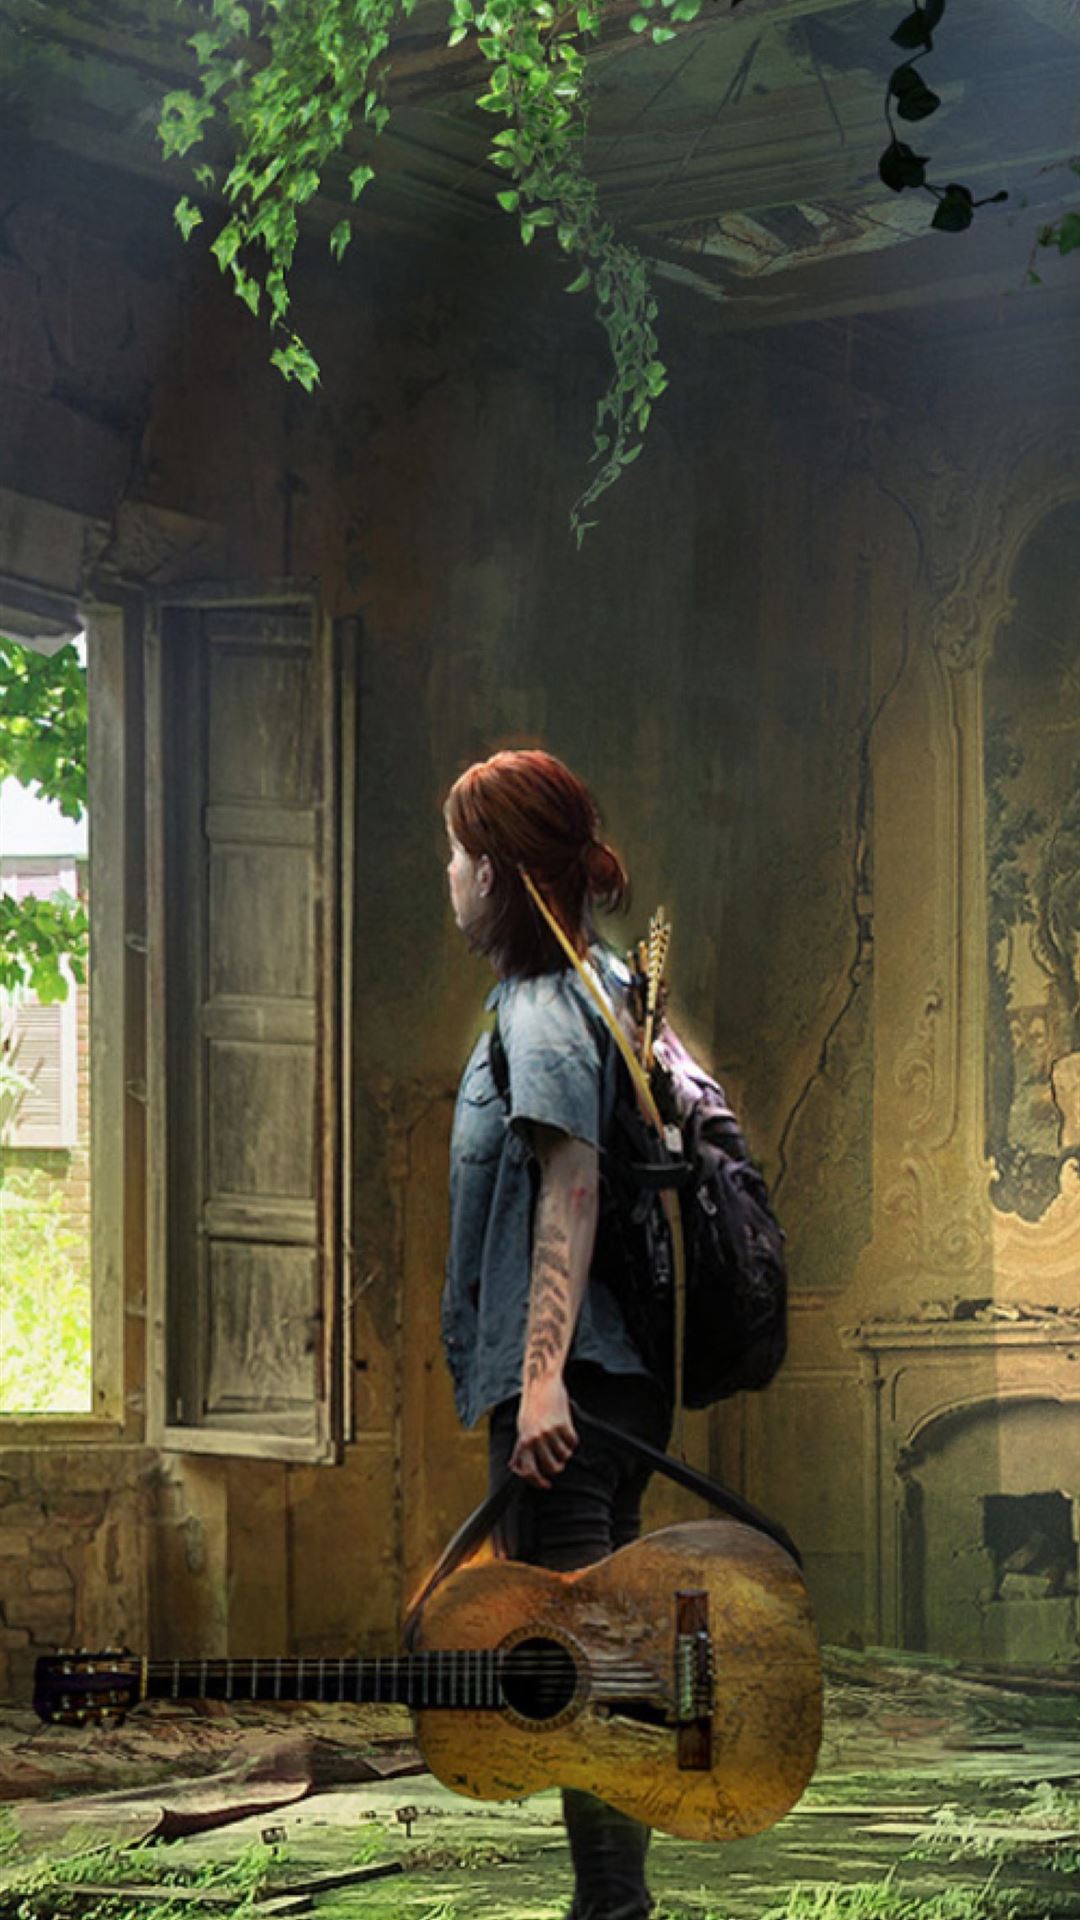 Wallpaper ID 374375  Video Game The Last of Us Part II Phone Wallpaper  Ellie The Last Of Us 1080x2160 free download